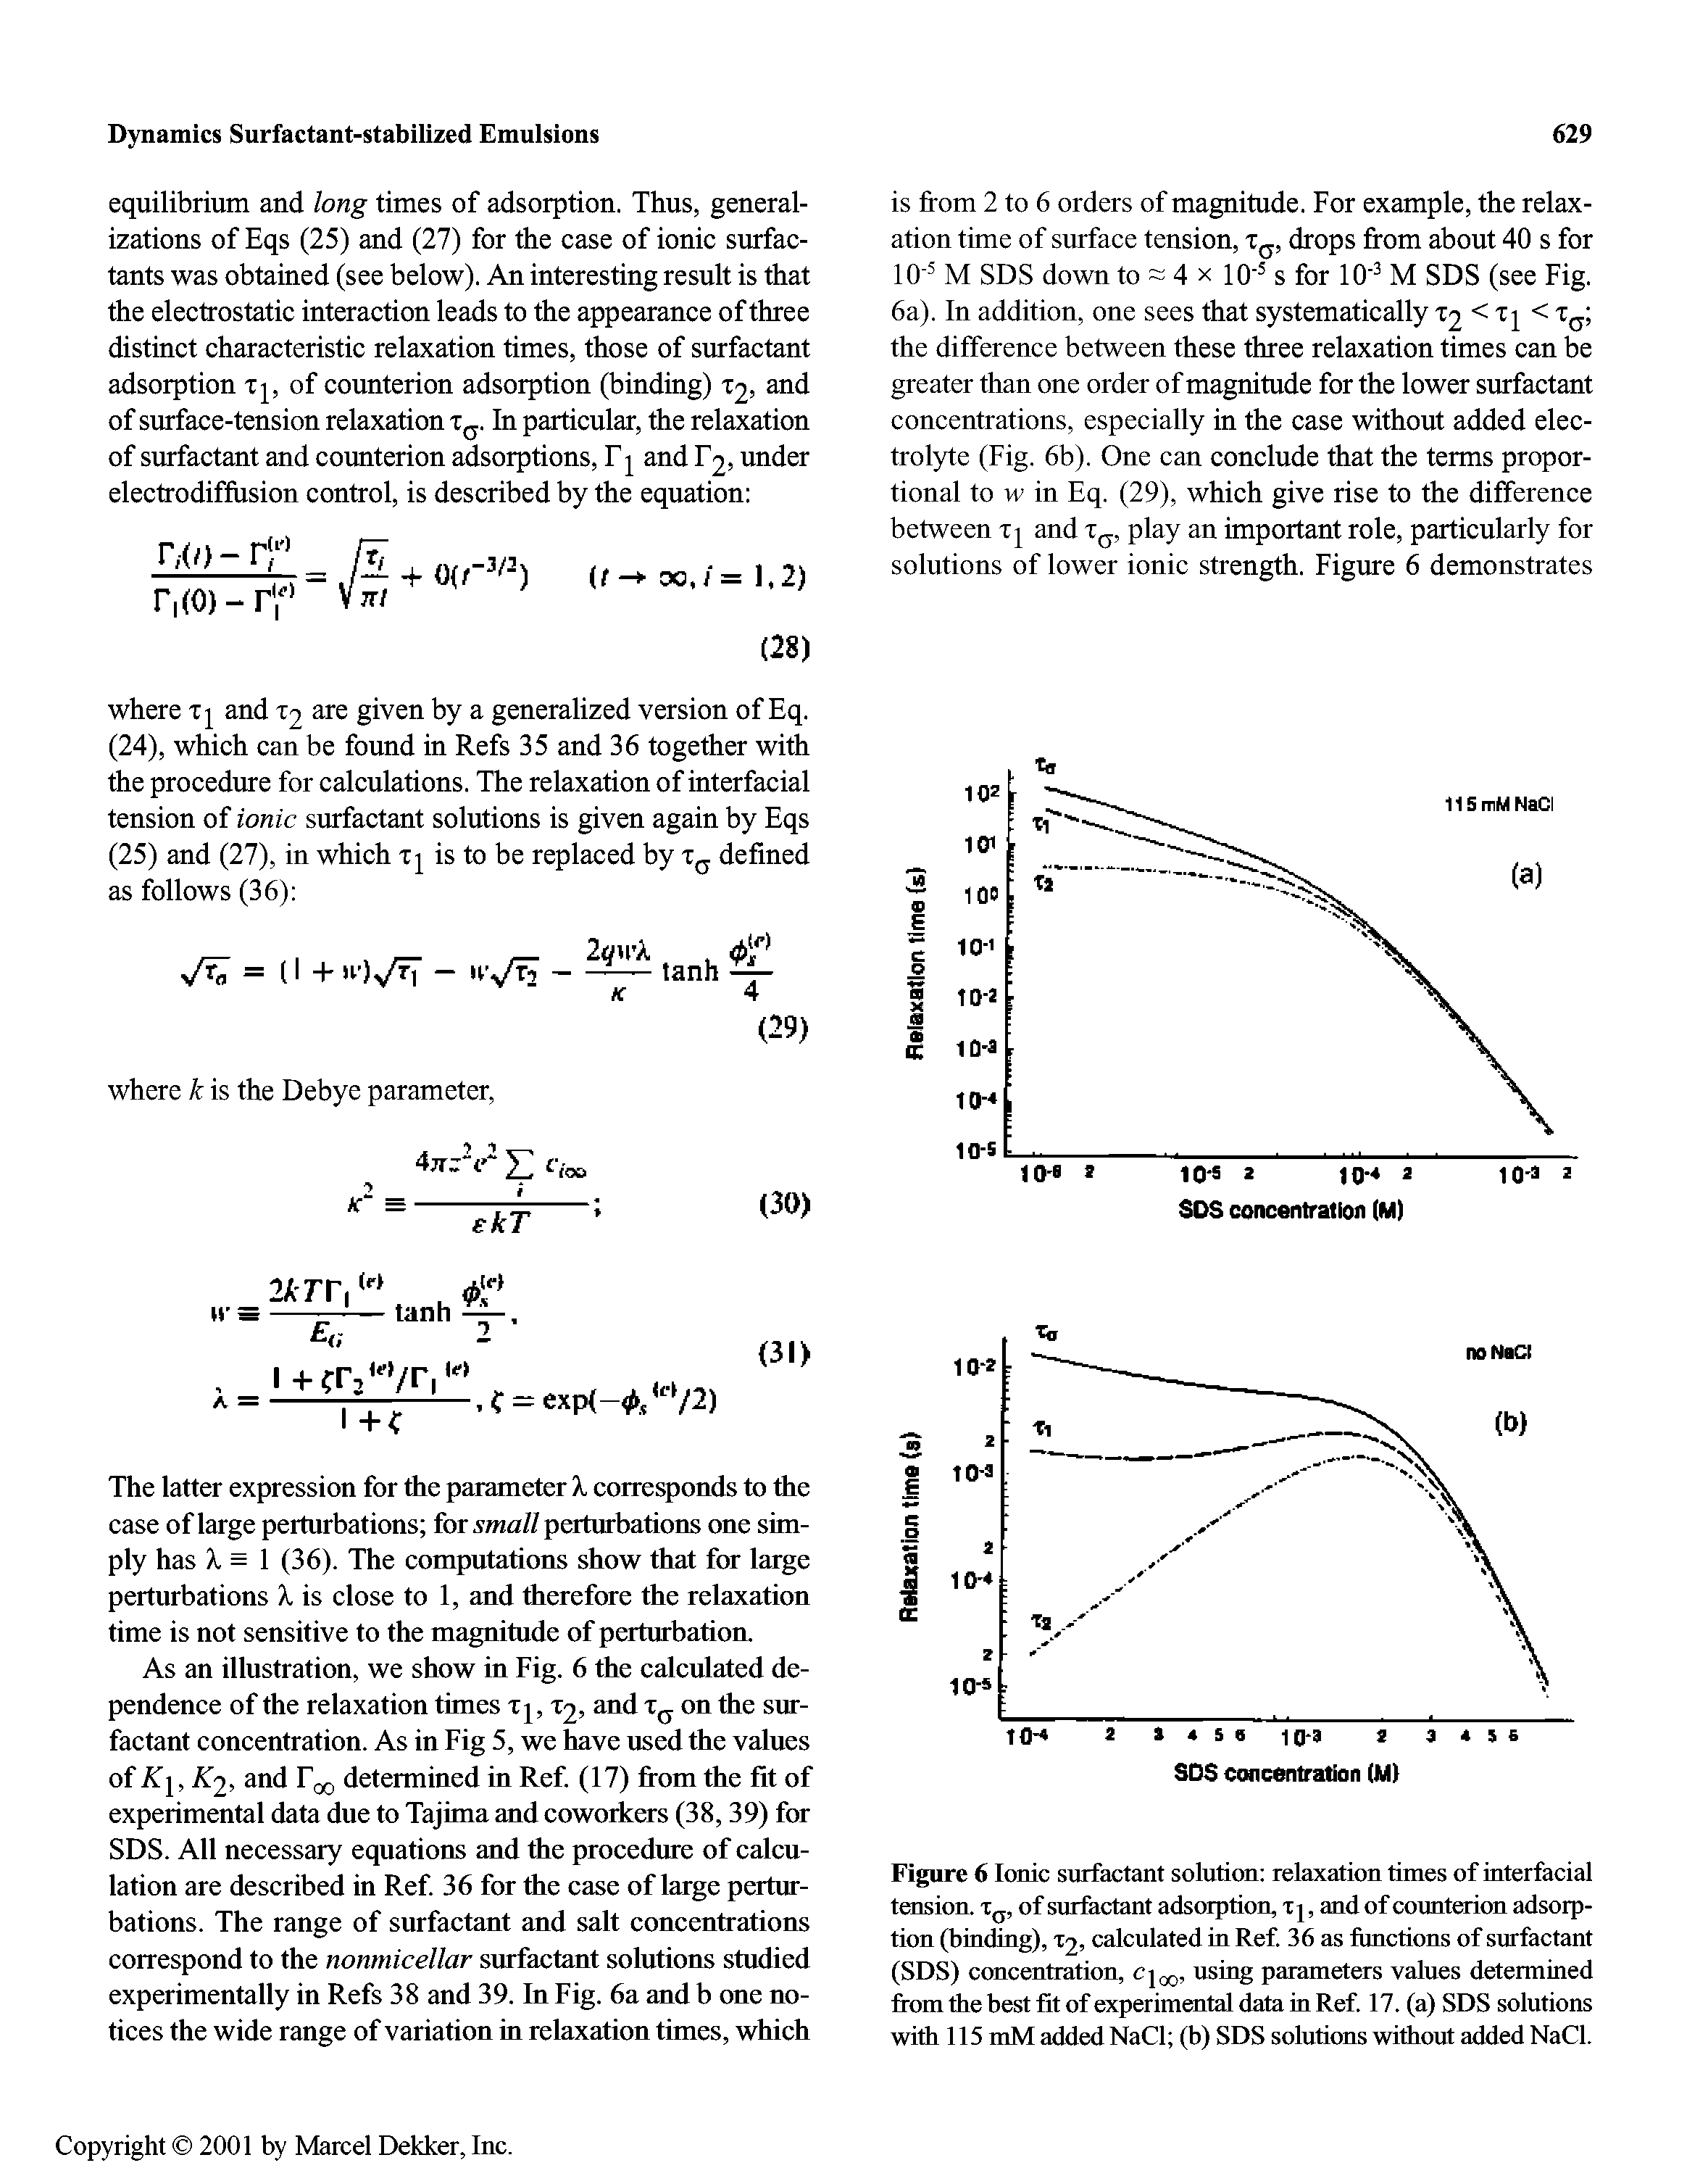 Figure 6 Ionic surfactant solution relaxation times of interfacial tension, x j, of surfactant adsorption, x j, and of counterion adsorption (binding), X2, calculated in Ref. 36 as functions of surfactant (SDS) concentration, cj q, using parameters values determined from the best fit of experimental data in Ref. 17. (a) SDS solutions with 115 mM added NaCl (b) SDS solutions without added NaCl.